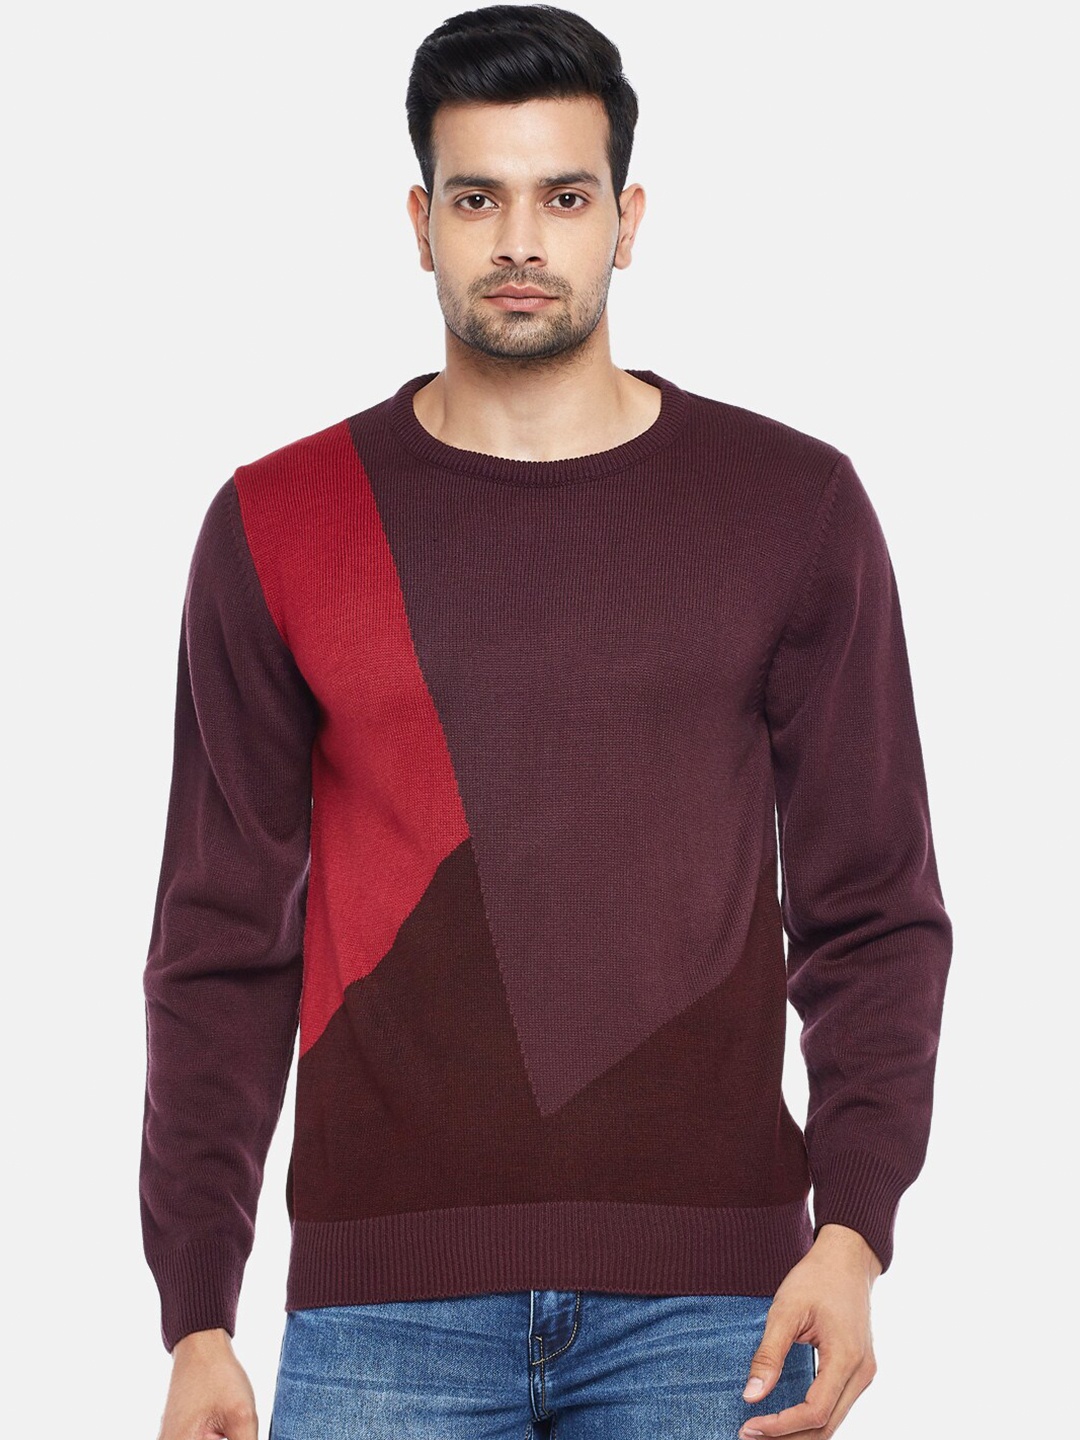 

BYFORD by Pantaloons Men Burgundy & Red Colourblocked Pullover Sweater